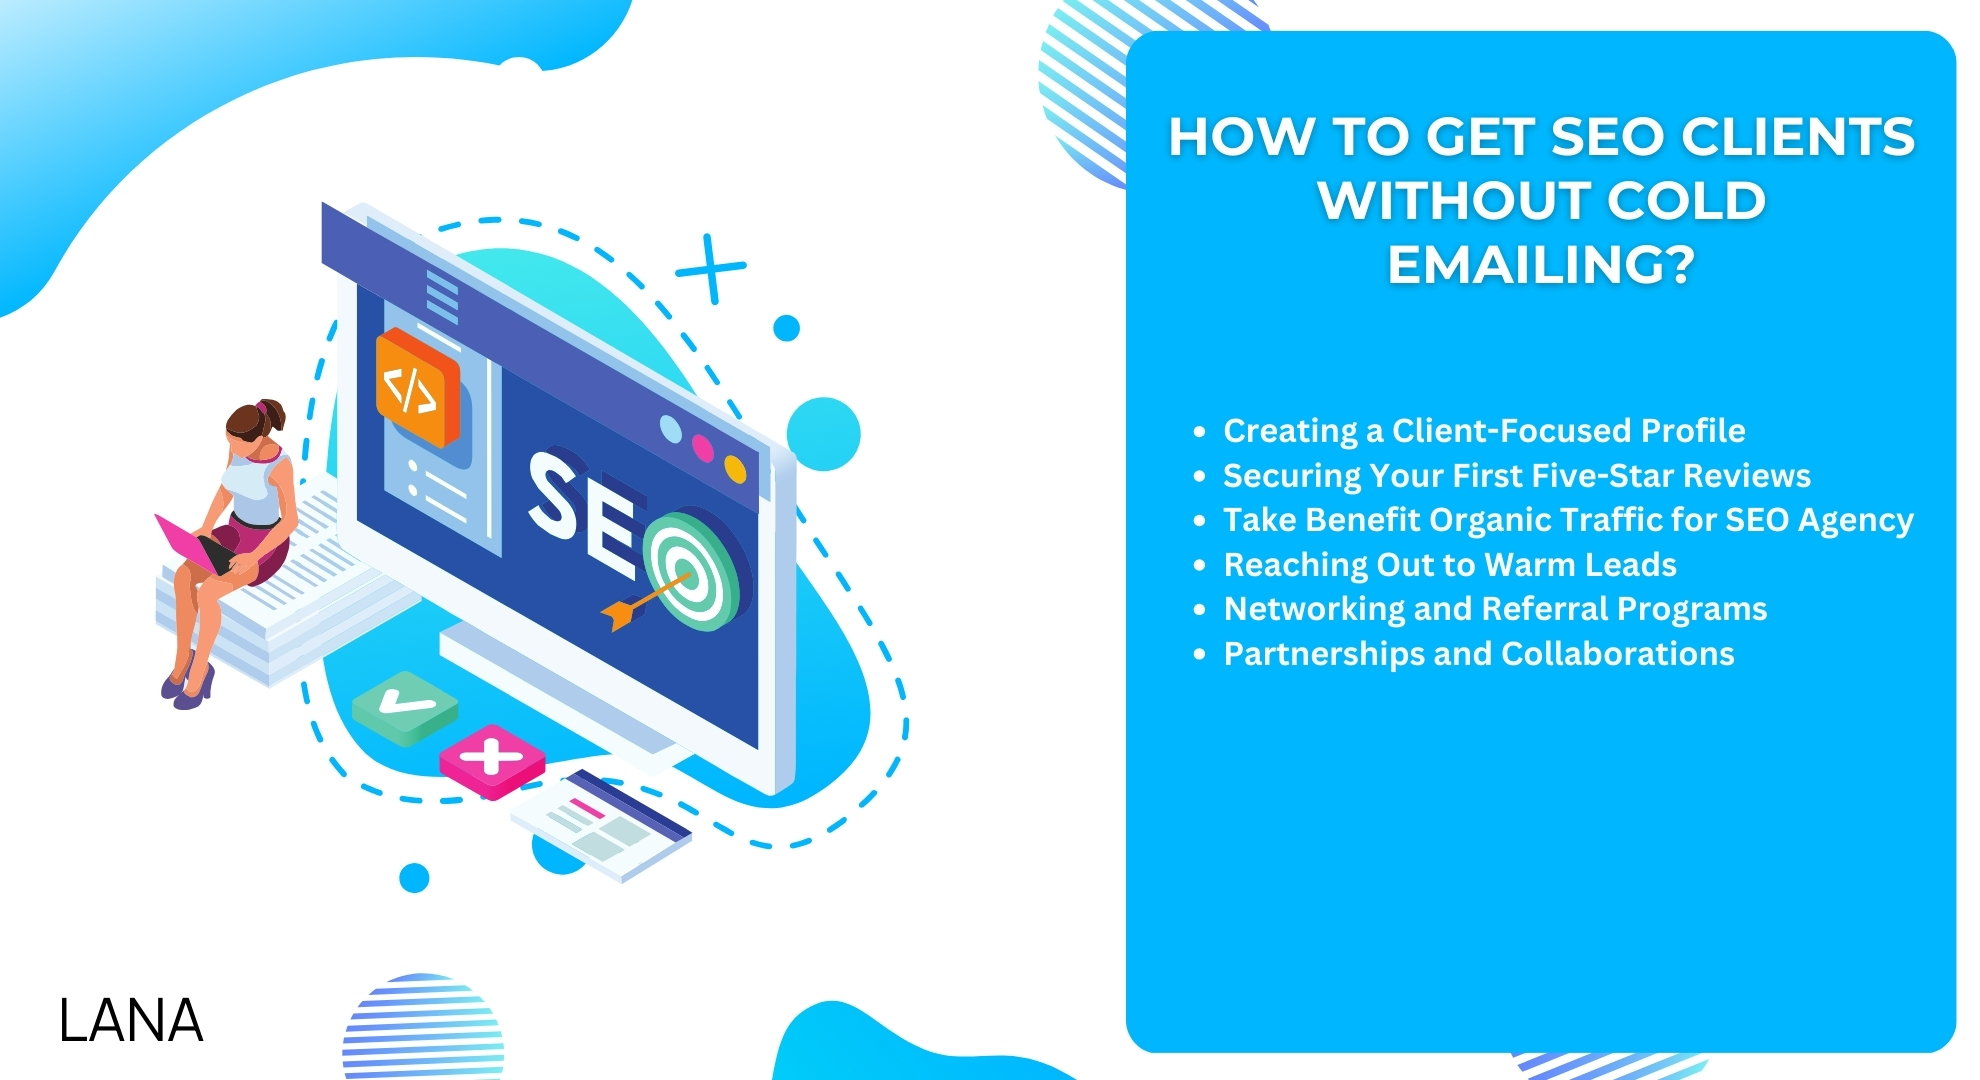 How to Get SEO Clients without Cold Emailing